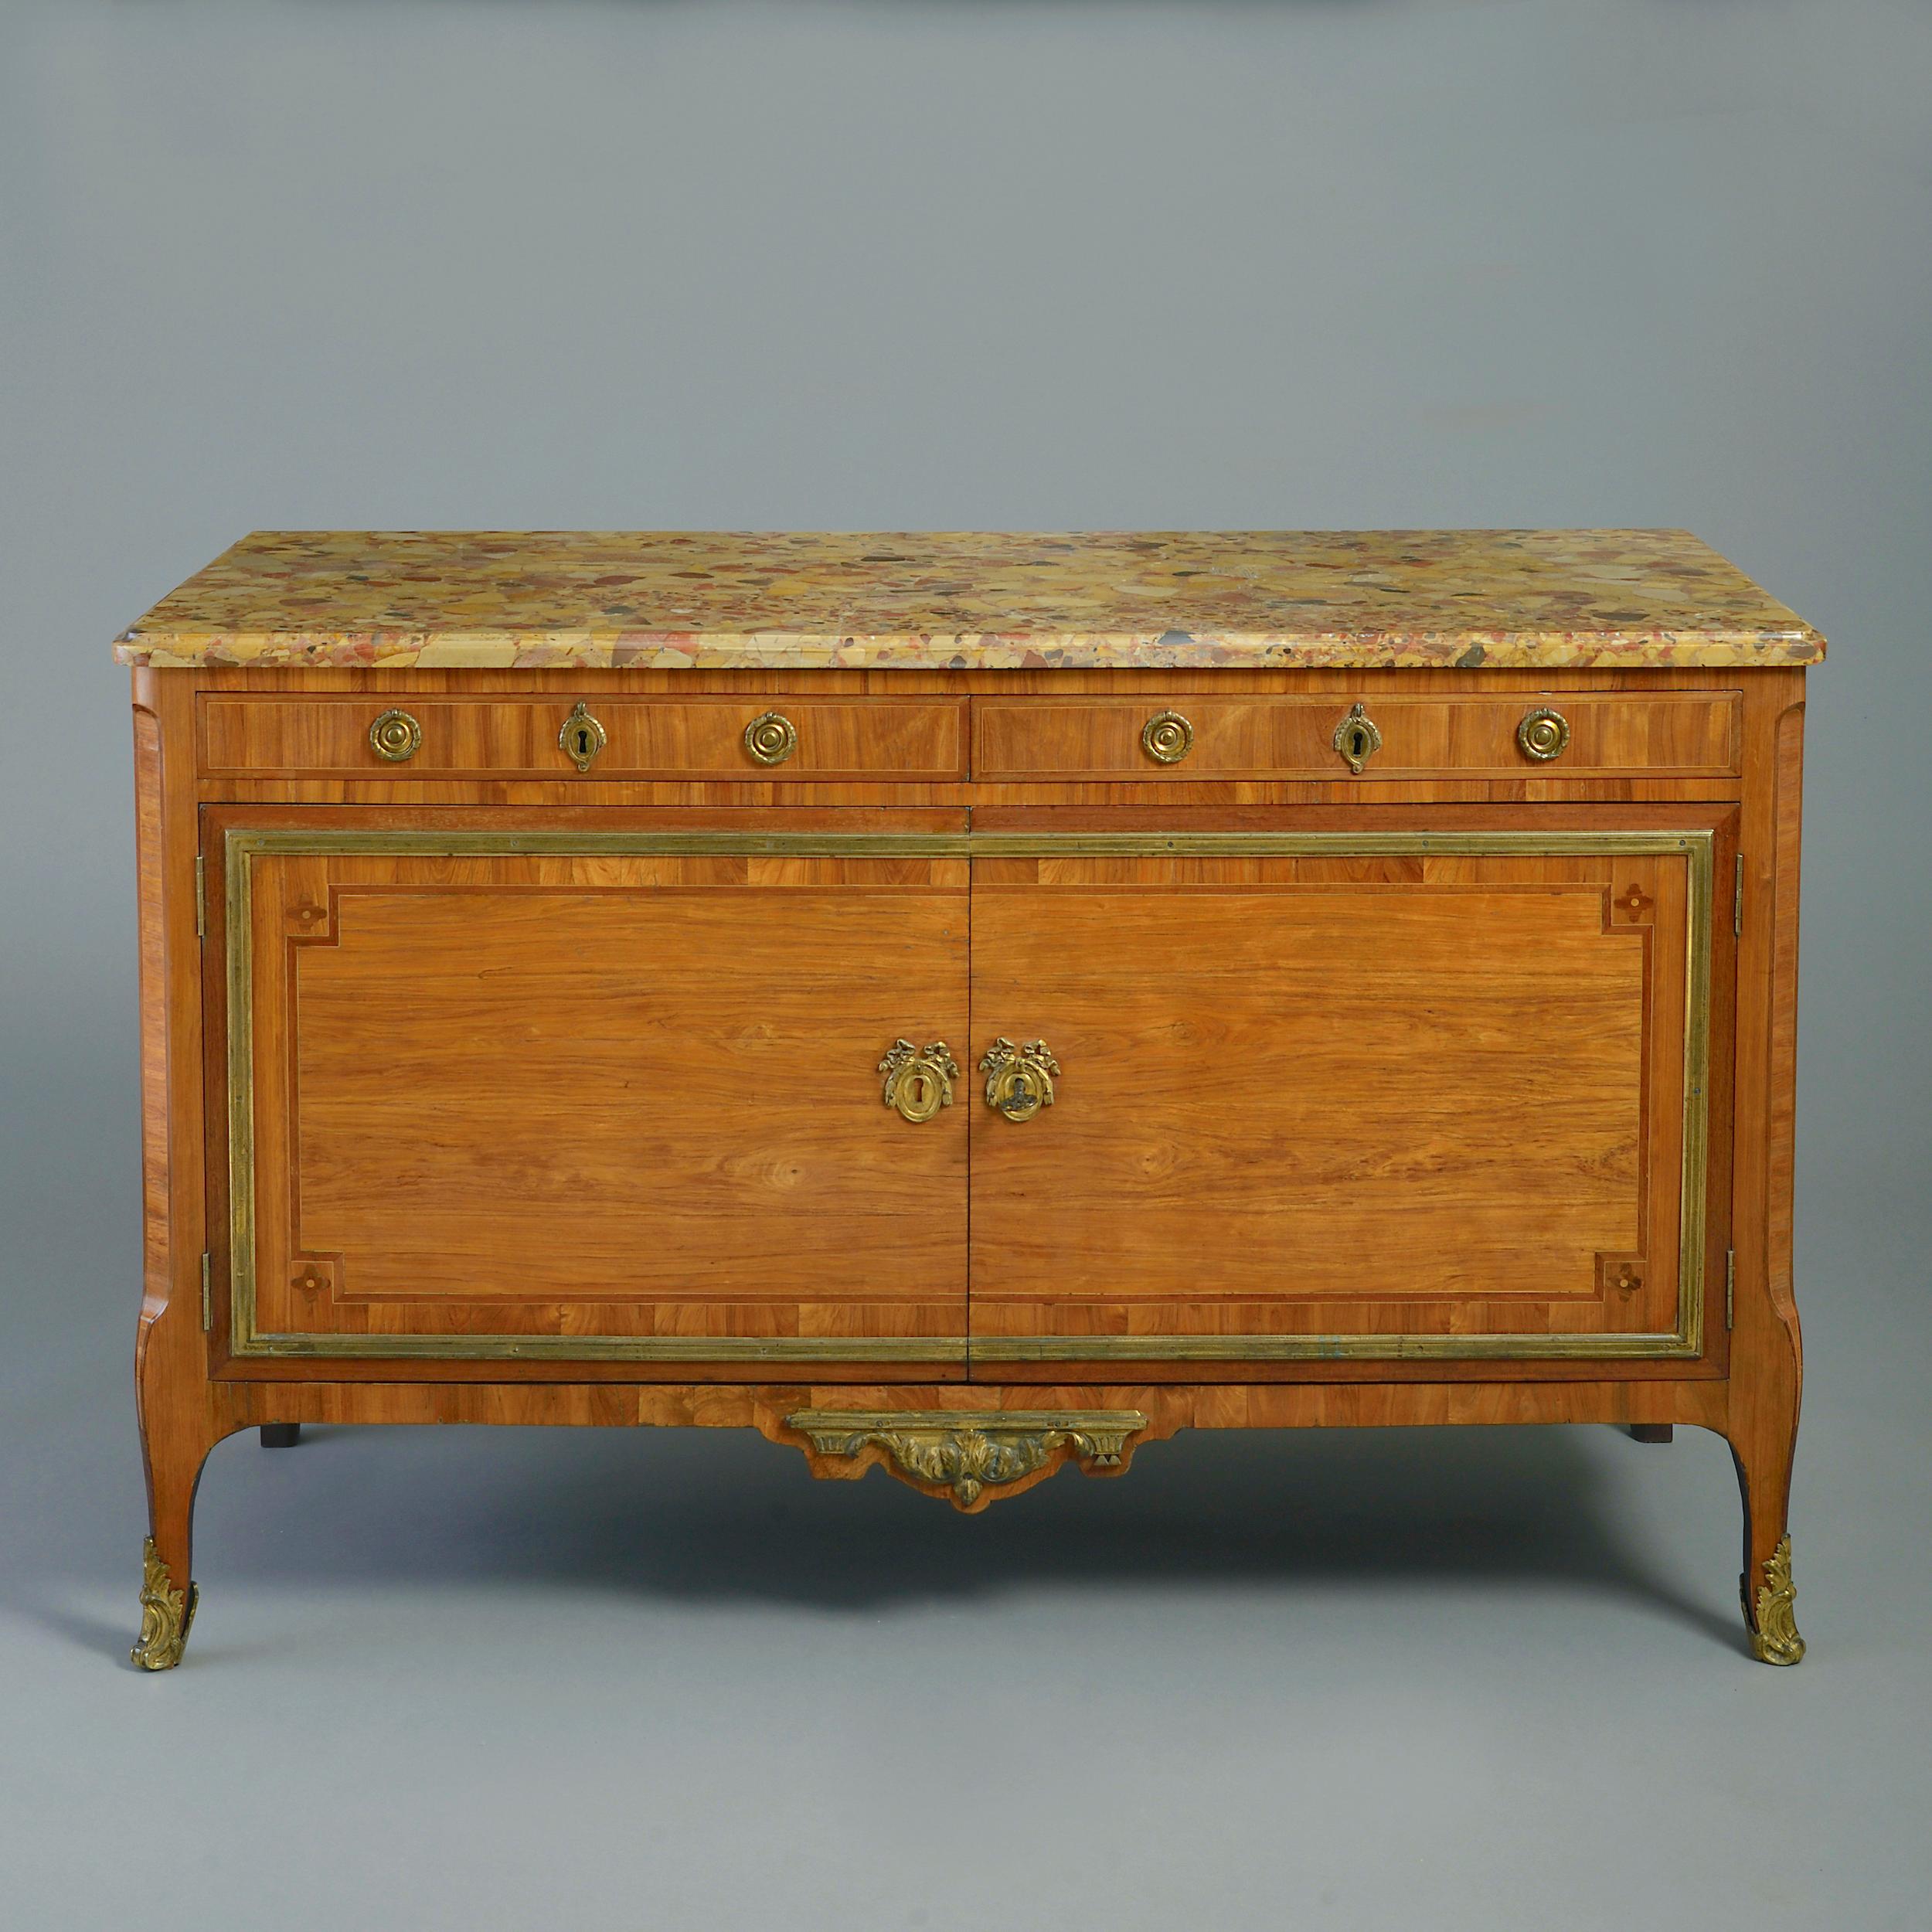 A fine Louis XVI ormolu-mounted kingwood and amaranth commode by Claude-Charles Saunier, with original Brêche d’Alep top, circa 1775.

Stamped C C SAUNIER JME.